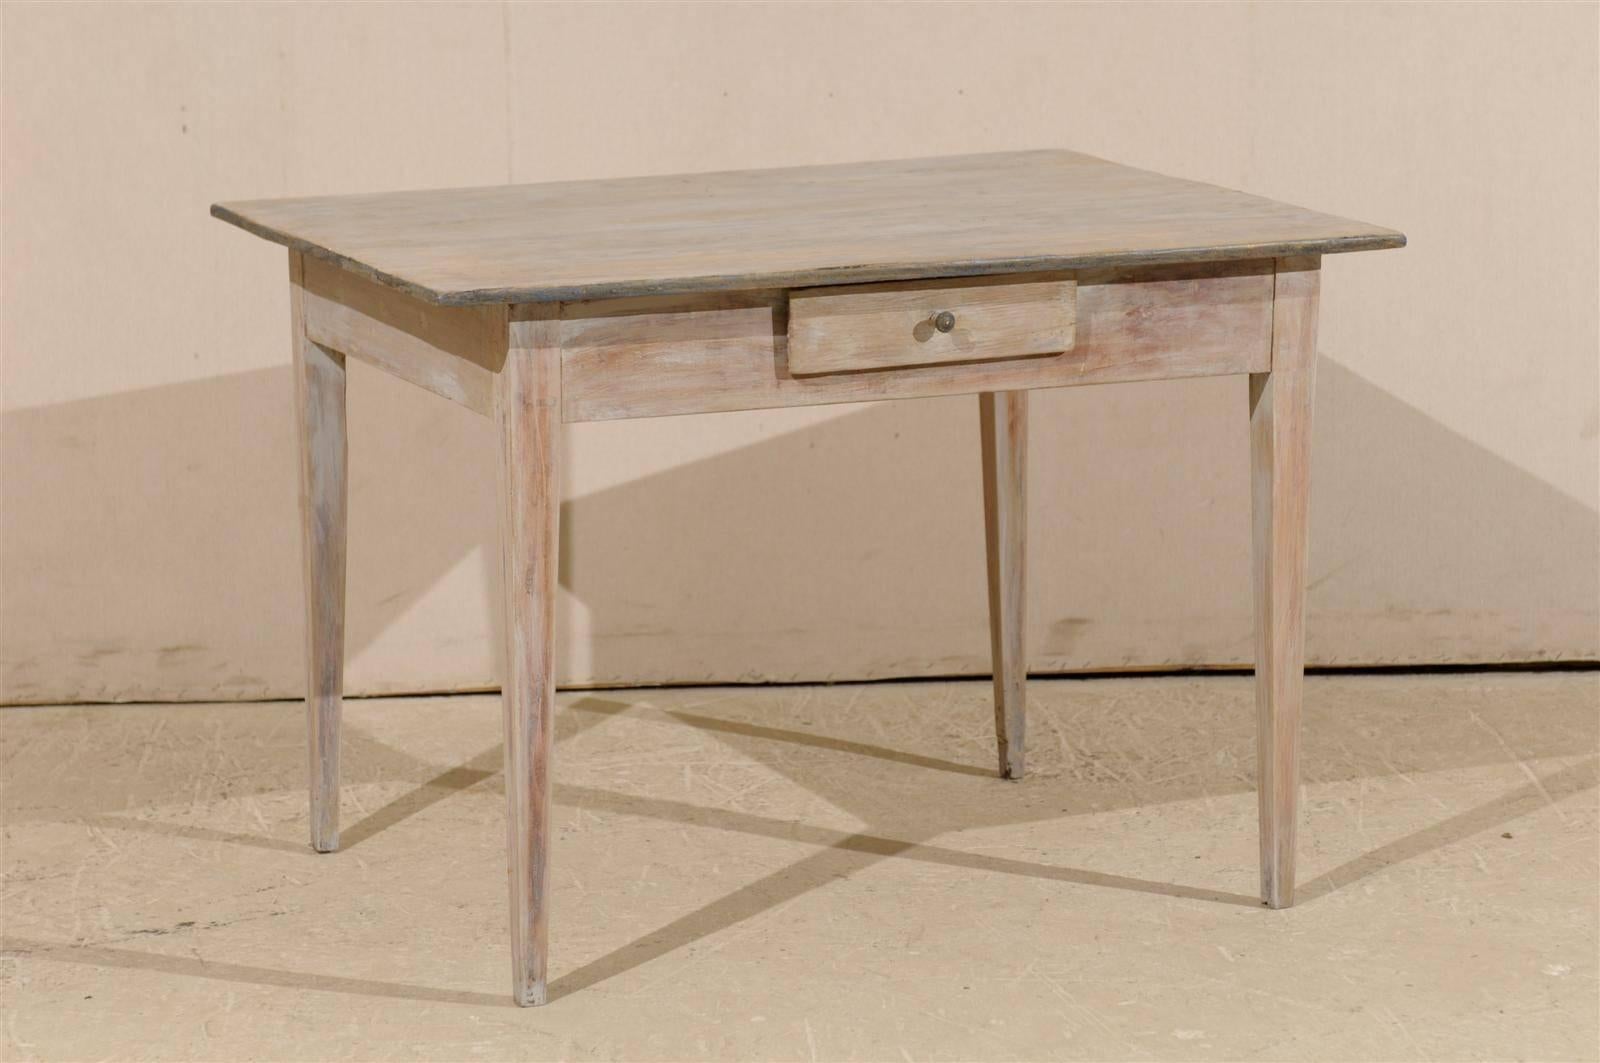 A Swedish early 19th century period Gustavian table. This Swedish side table with single drawer and whitewash finish with wood coming through, is raised on four tapered legs.